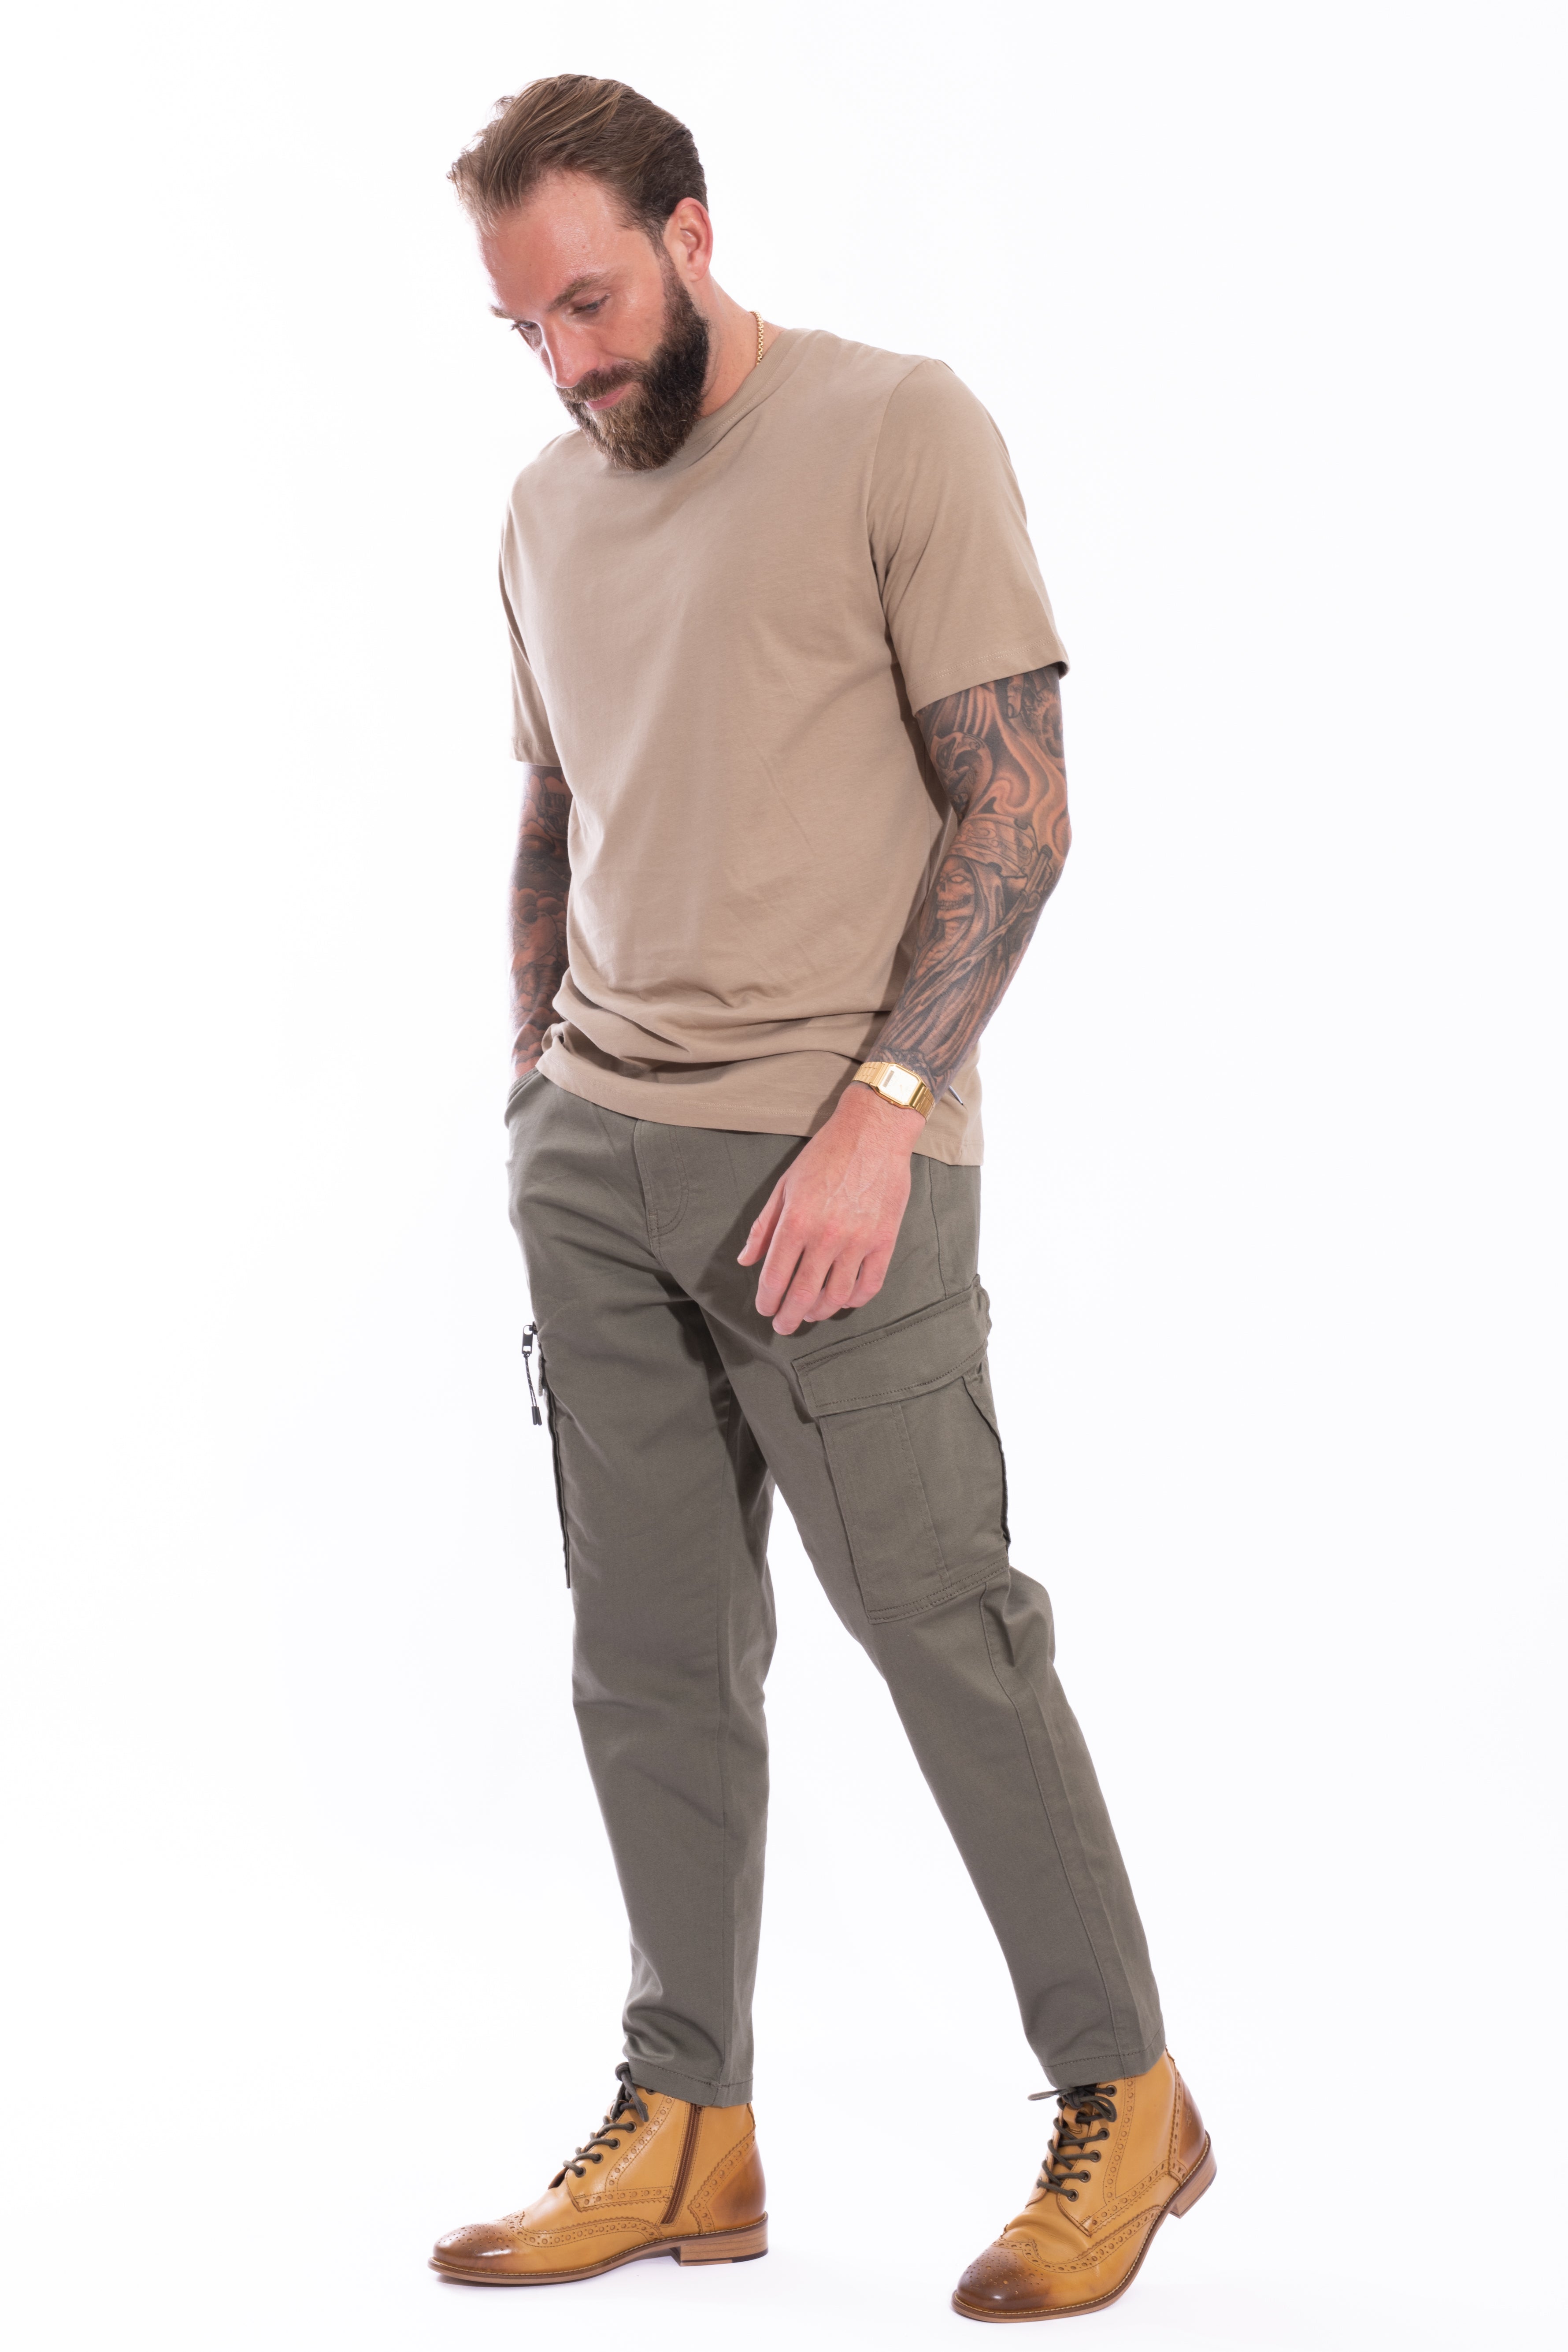 Buy Olive Cargo Pants Online | The Label Life